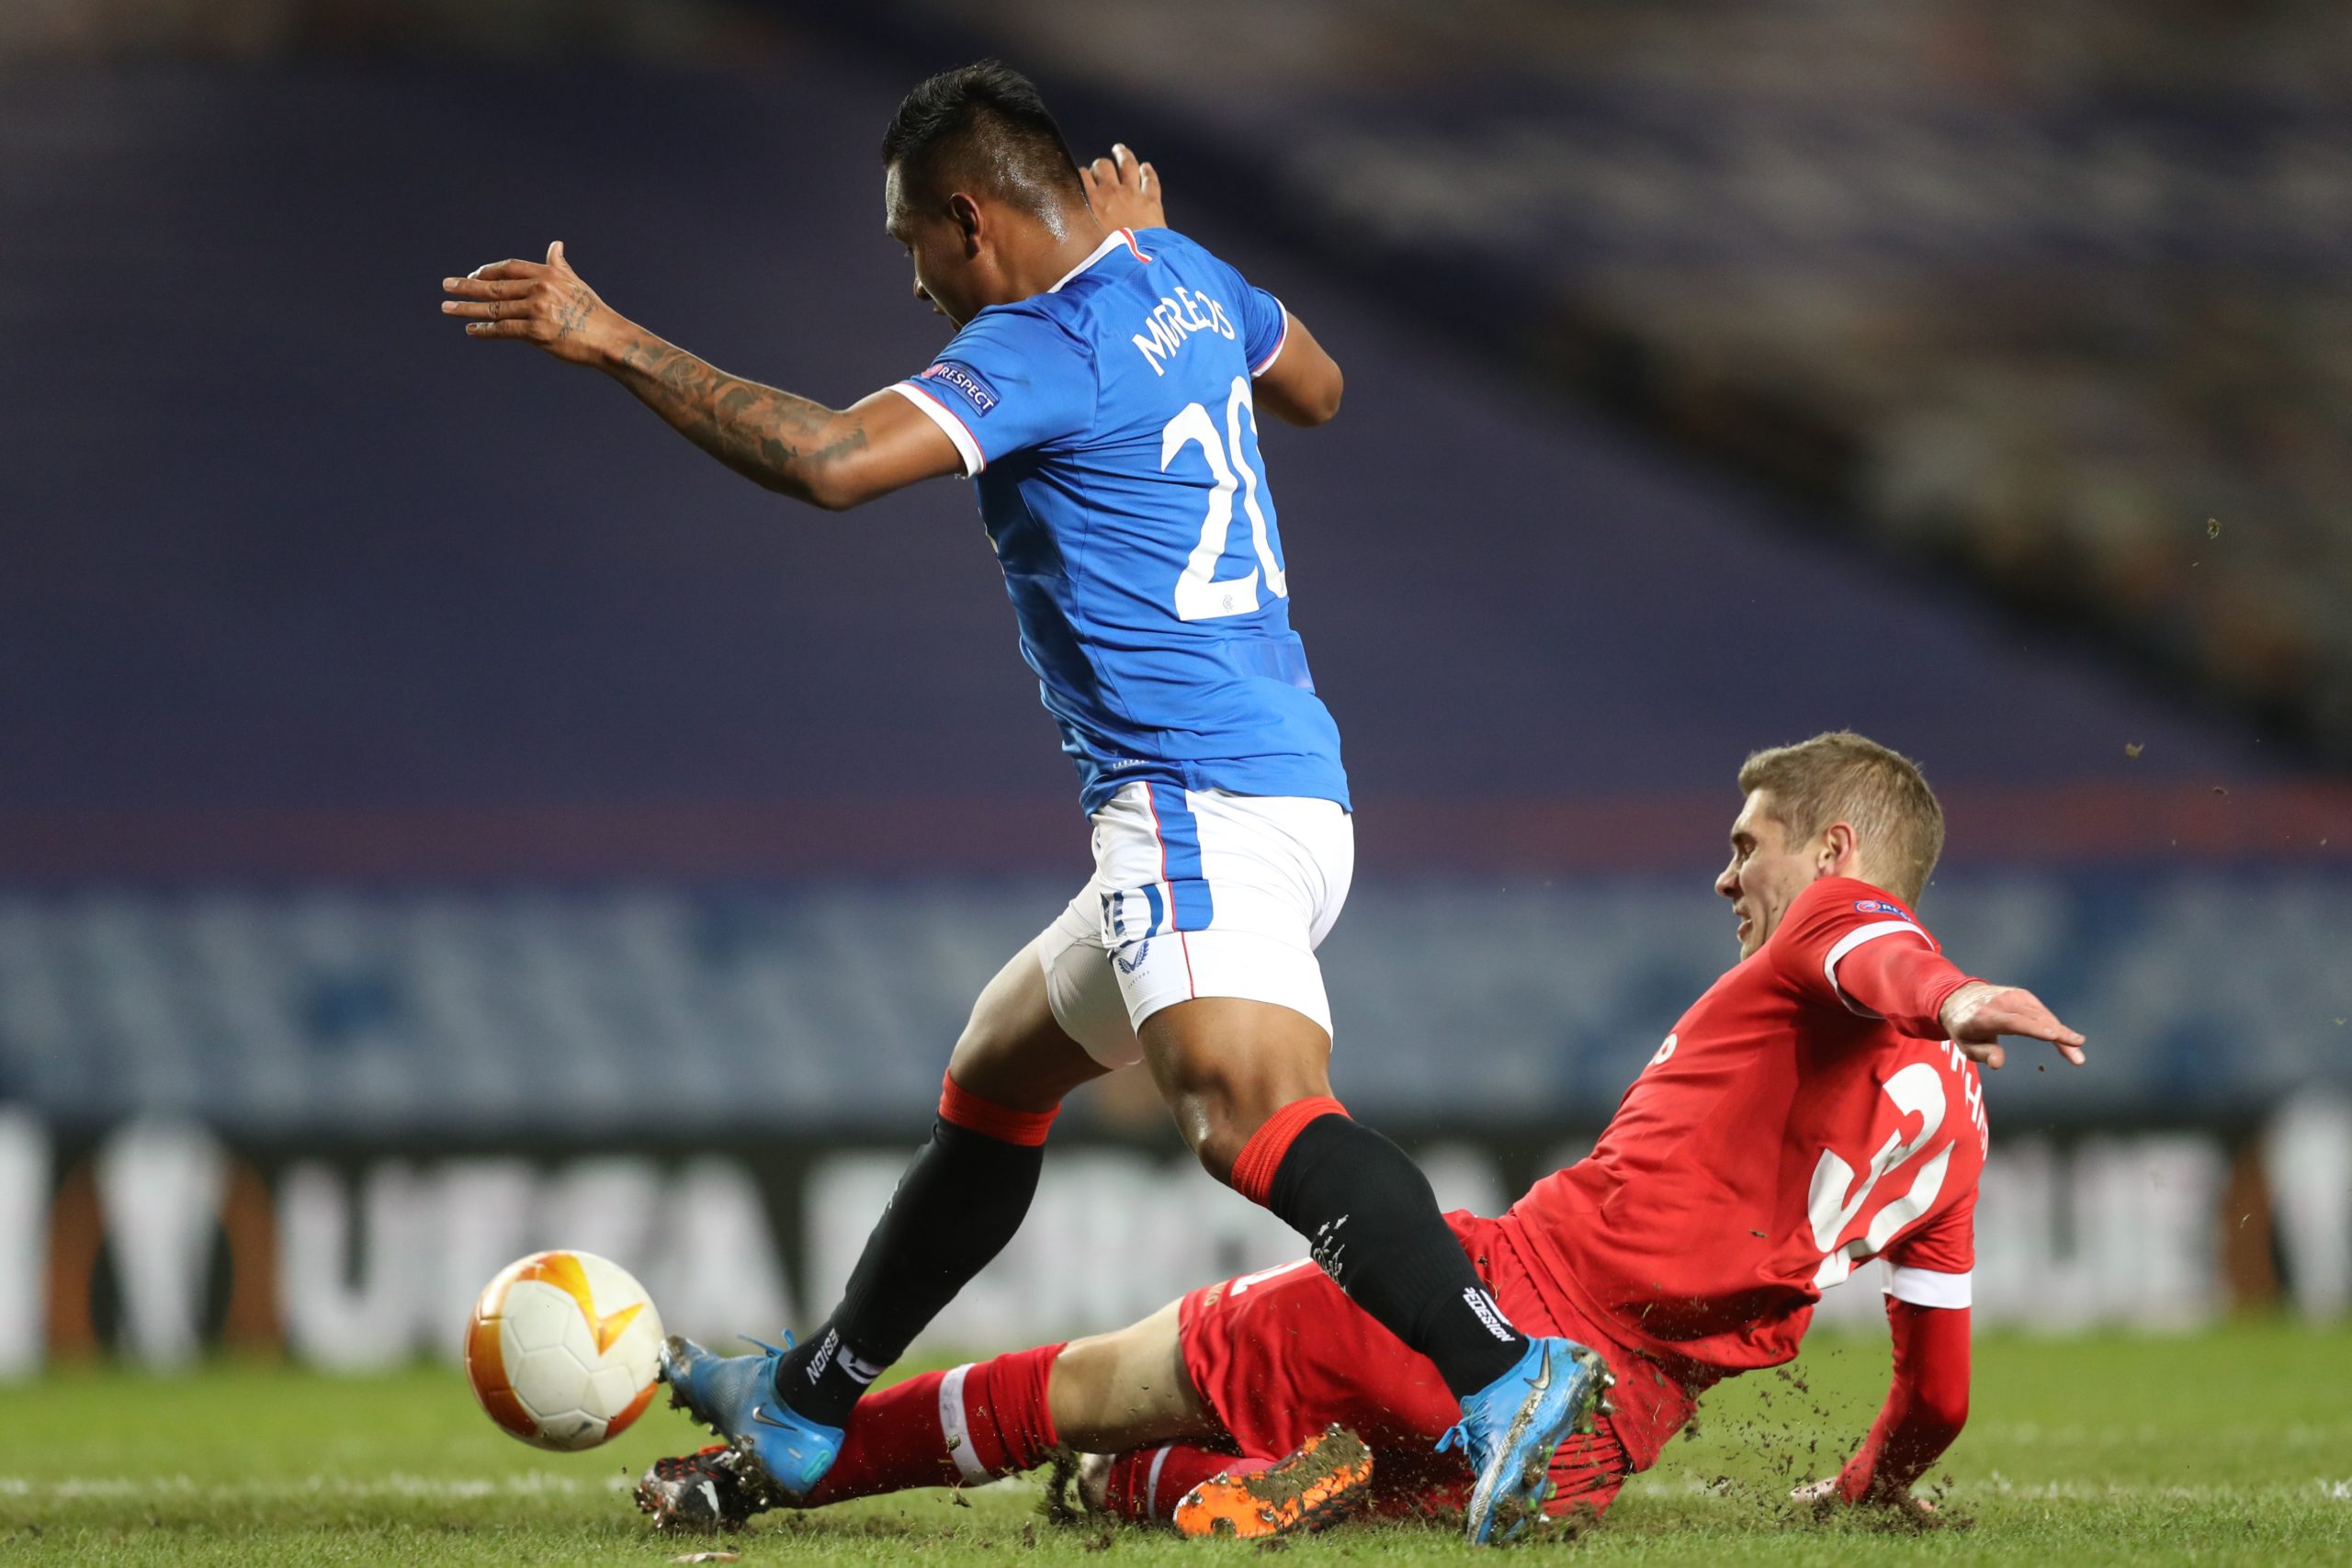 Rangers' Colombian striker Alfredo Morelos (L) vies with Antwerp's French defender Maxime Le Marchand (R) during the UEFA Europa League Round of 32, 2nd leg football match between Rangers and Royal Antwerp at the Ibrox Stadium in Glasgow on February 25, 2021. (Photo by RUSSELL CHEYNE / POOL / AFP) (Photo by RUSSELL CHEYNE/POOL/AFP via Getty Images)